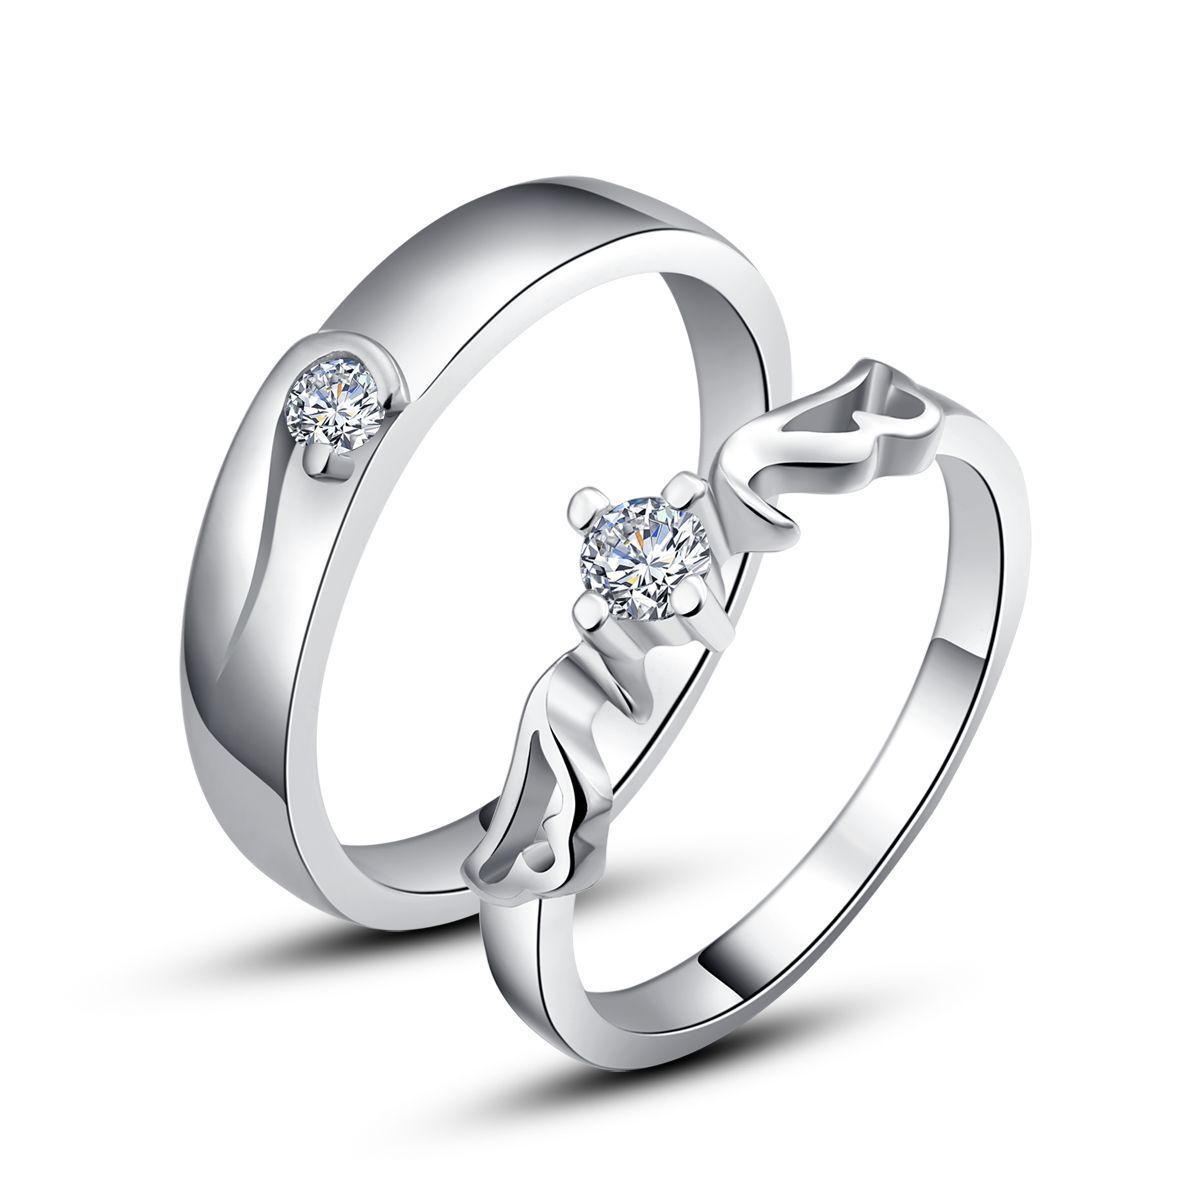 ... Hers Rings Couples Promise Rings Wedding White Gold Ring w Diamond